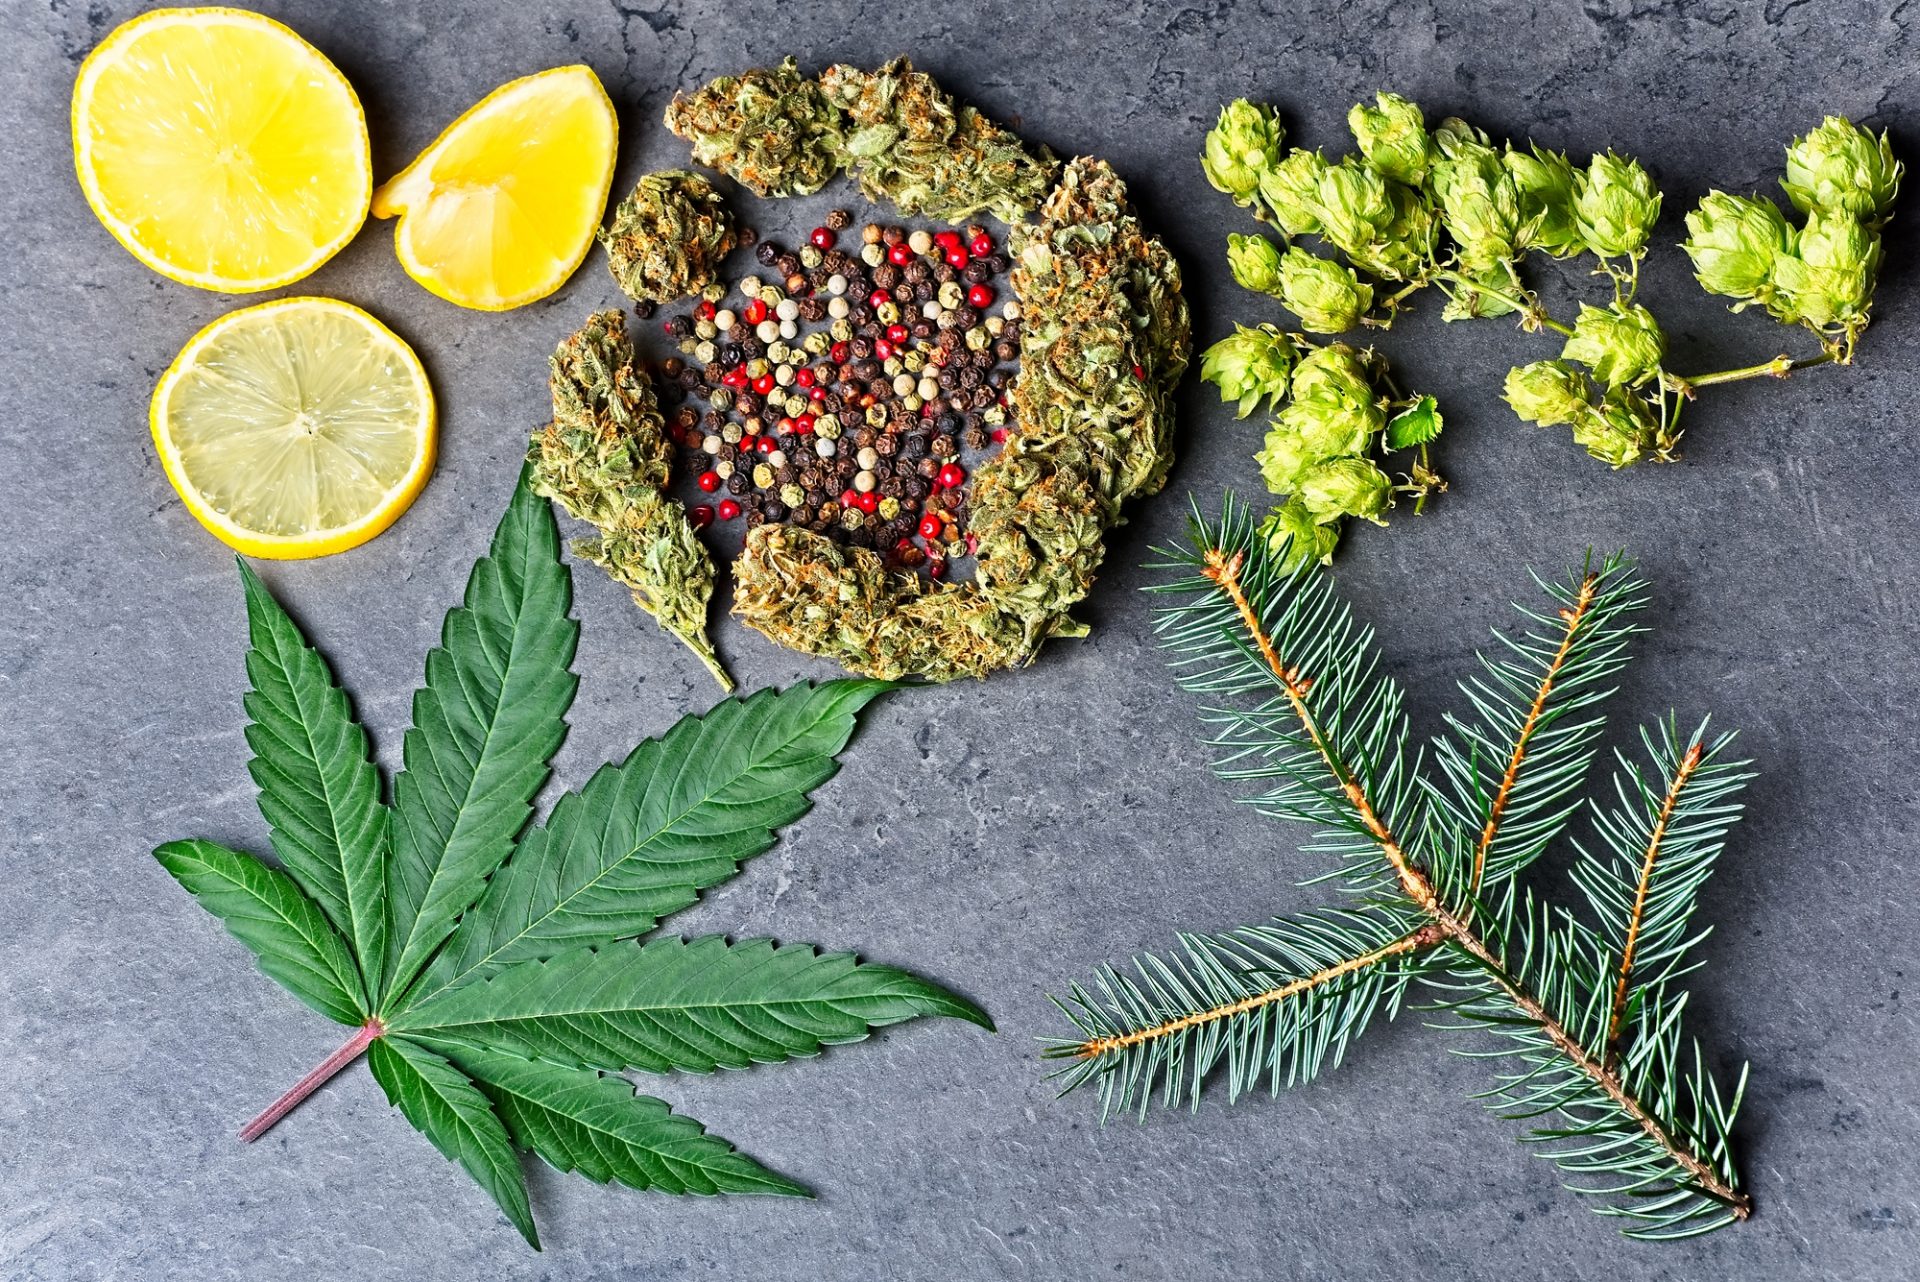 Cannabis bud and leaf with hops, pepper, lemons and fir needles